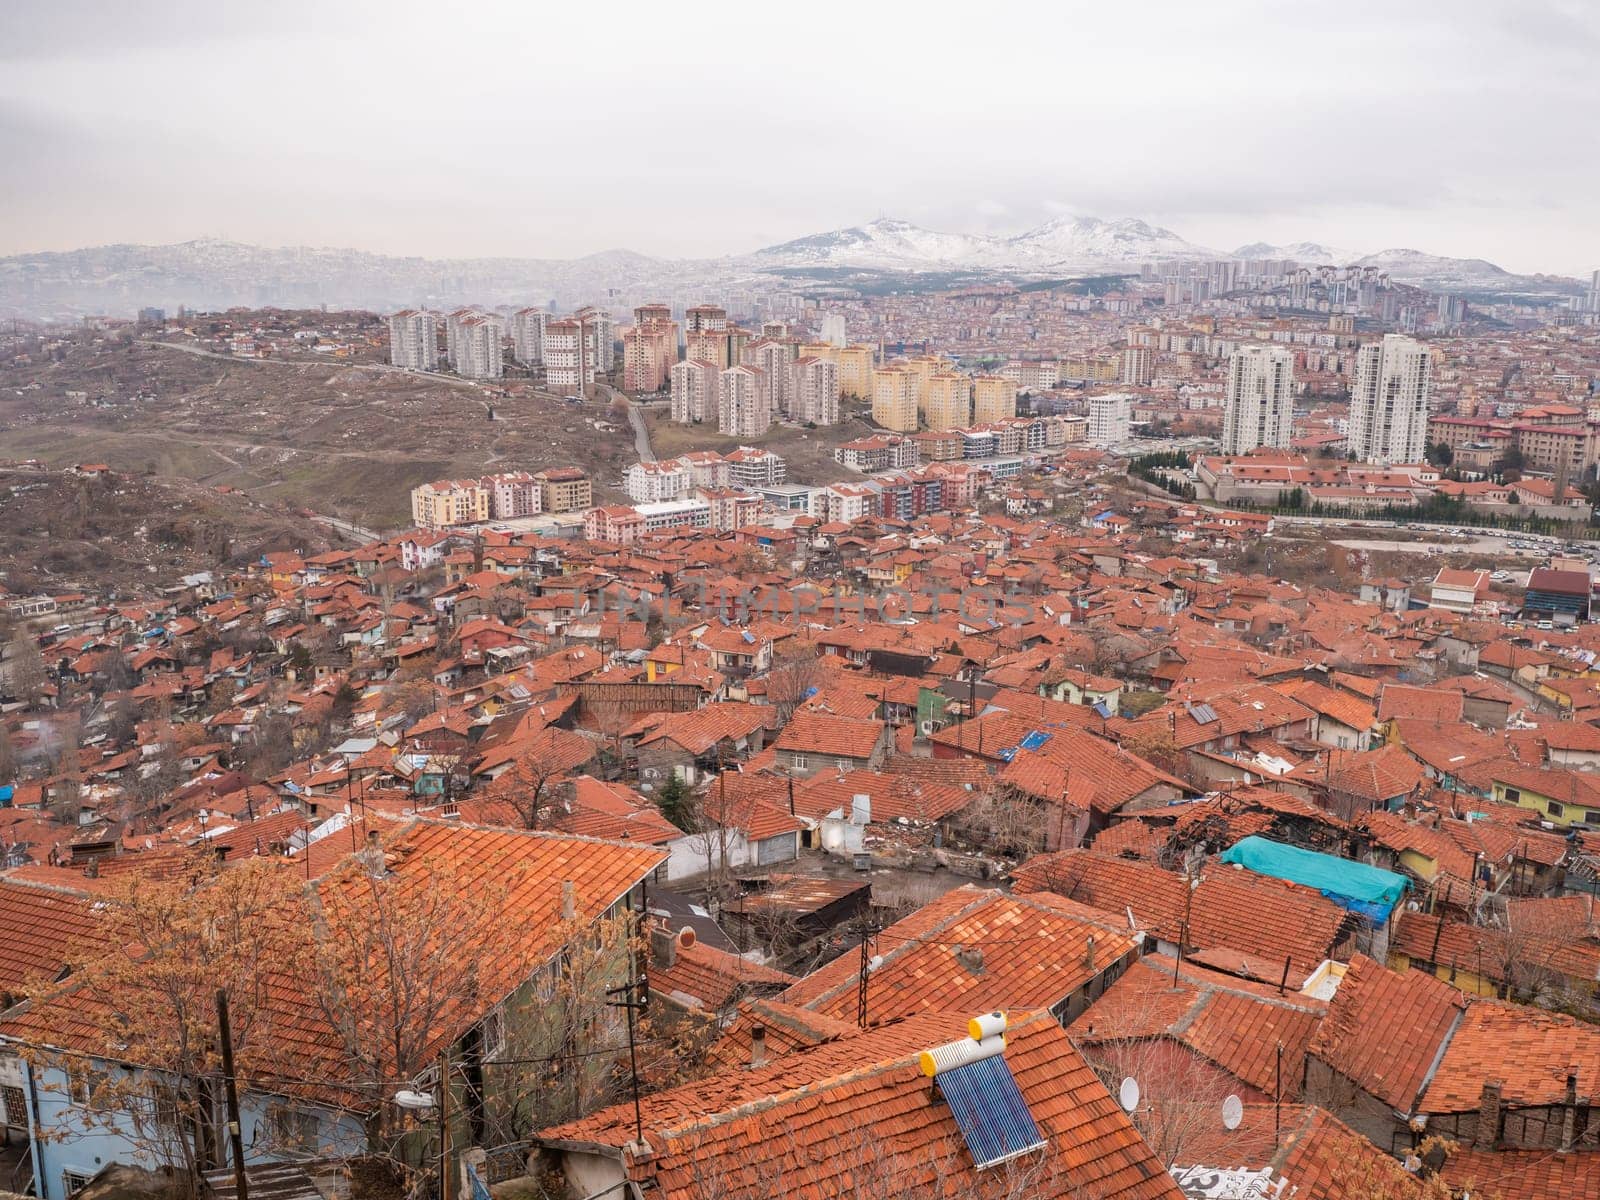 View of the Turkish capital Ankara from the castle on top